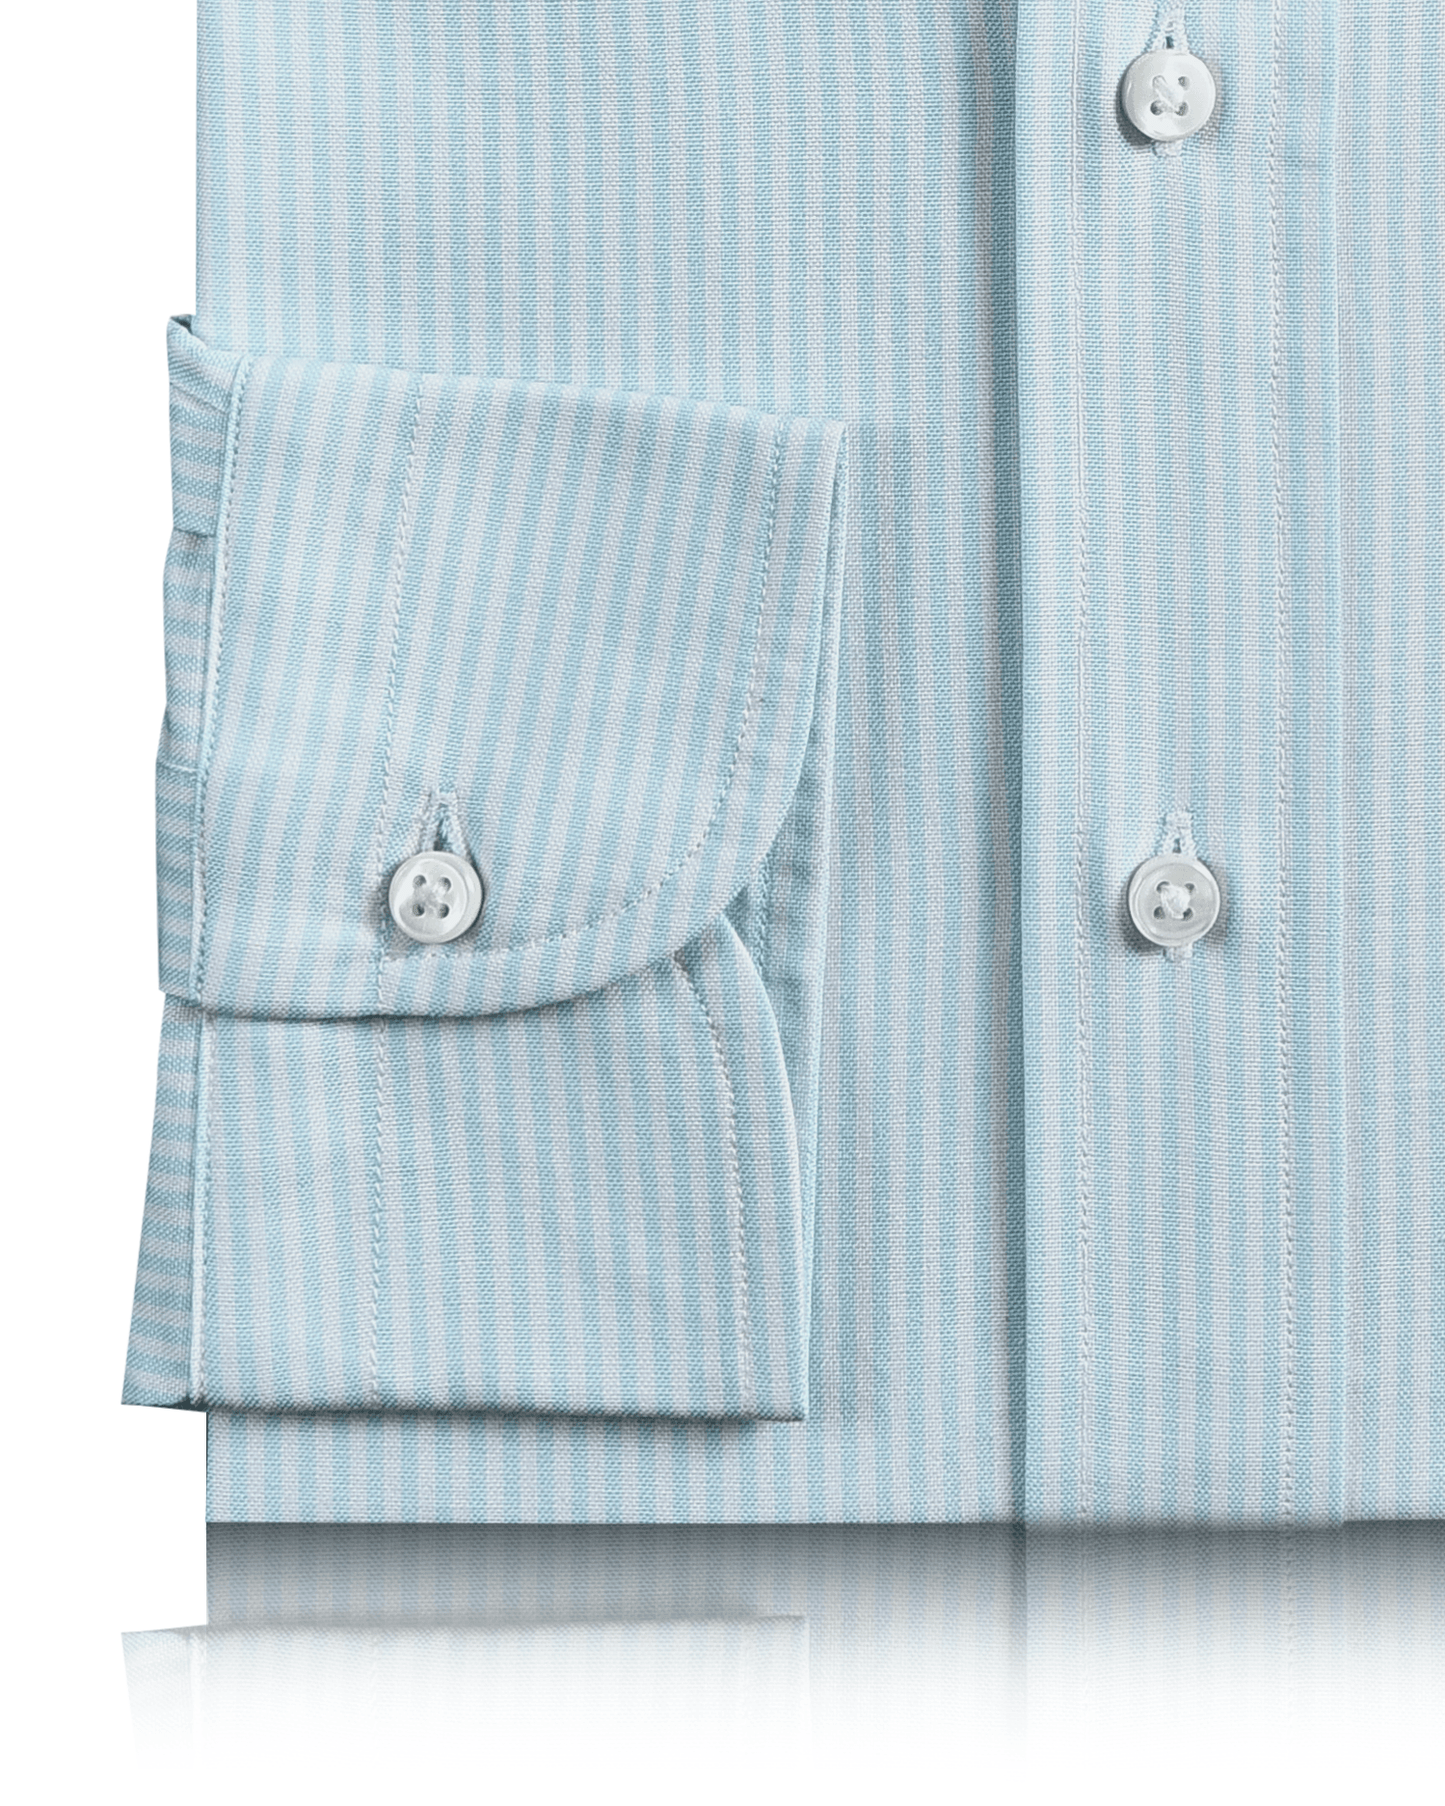 Cuff of the custom oxford shirt for men by Luxire in sky blue with dress stripes